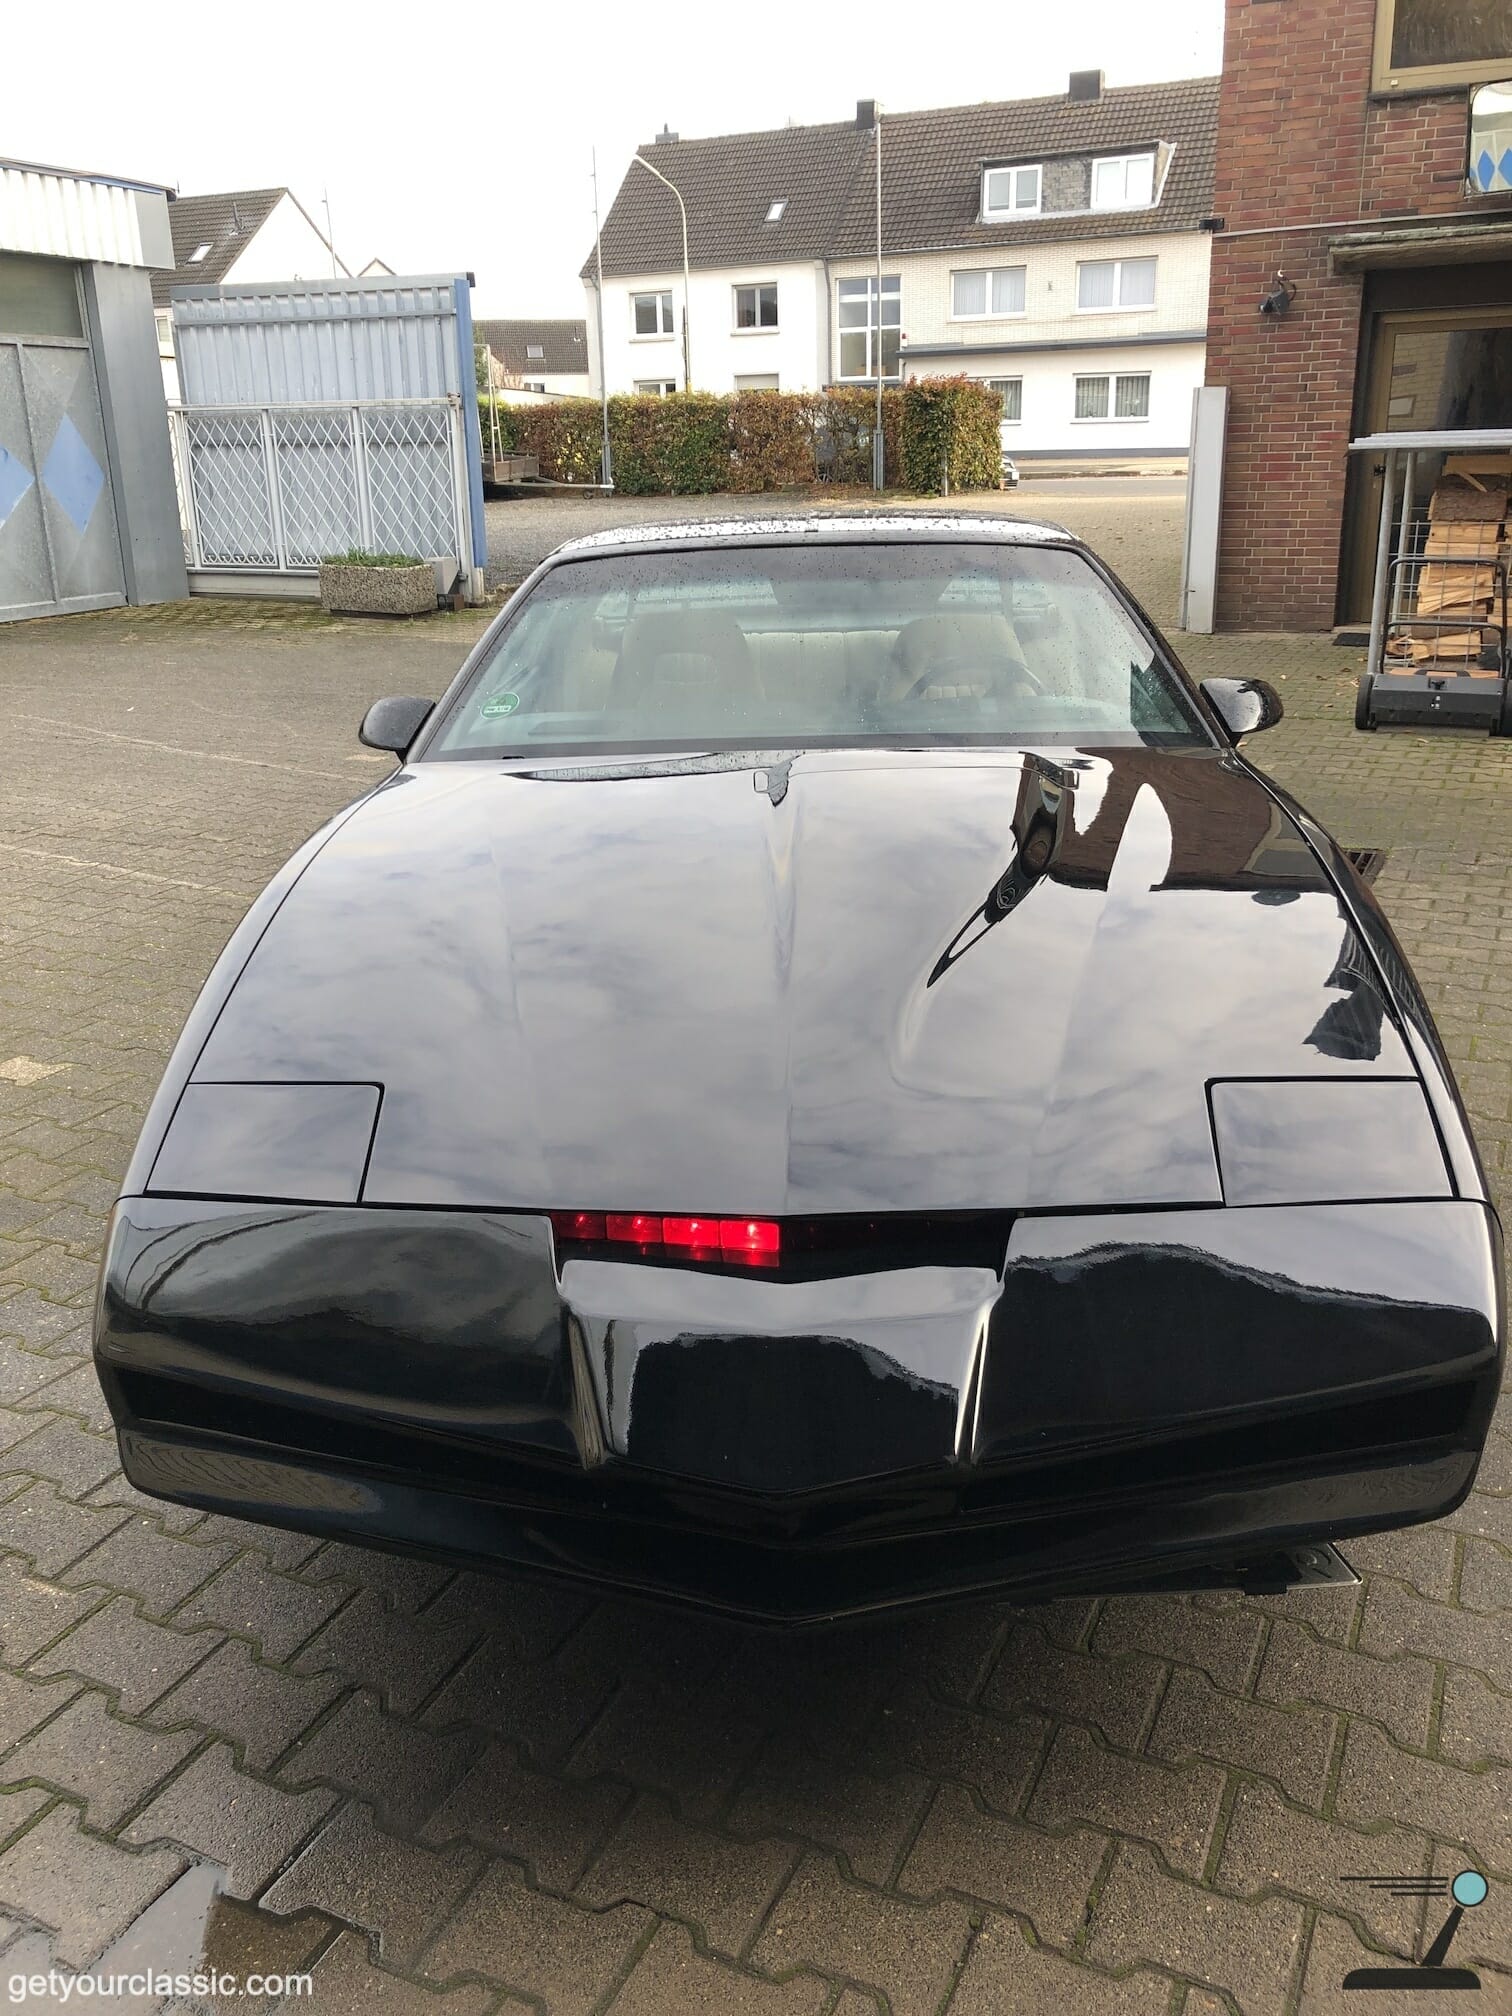 KITT & caboodle: Hasselhoff props and 'Knight Rider' car for sale